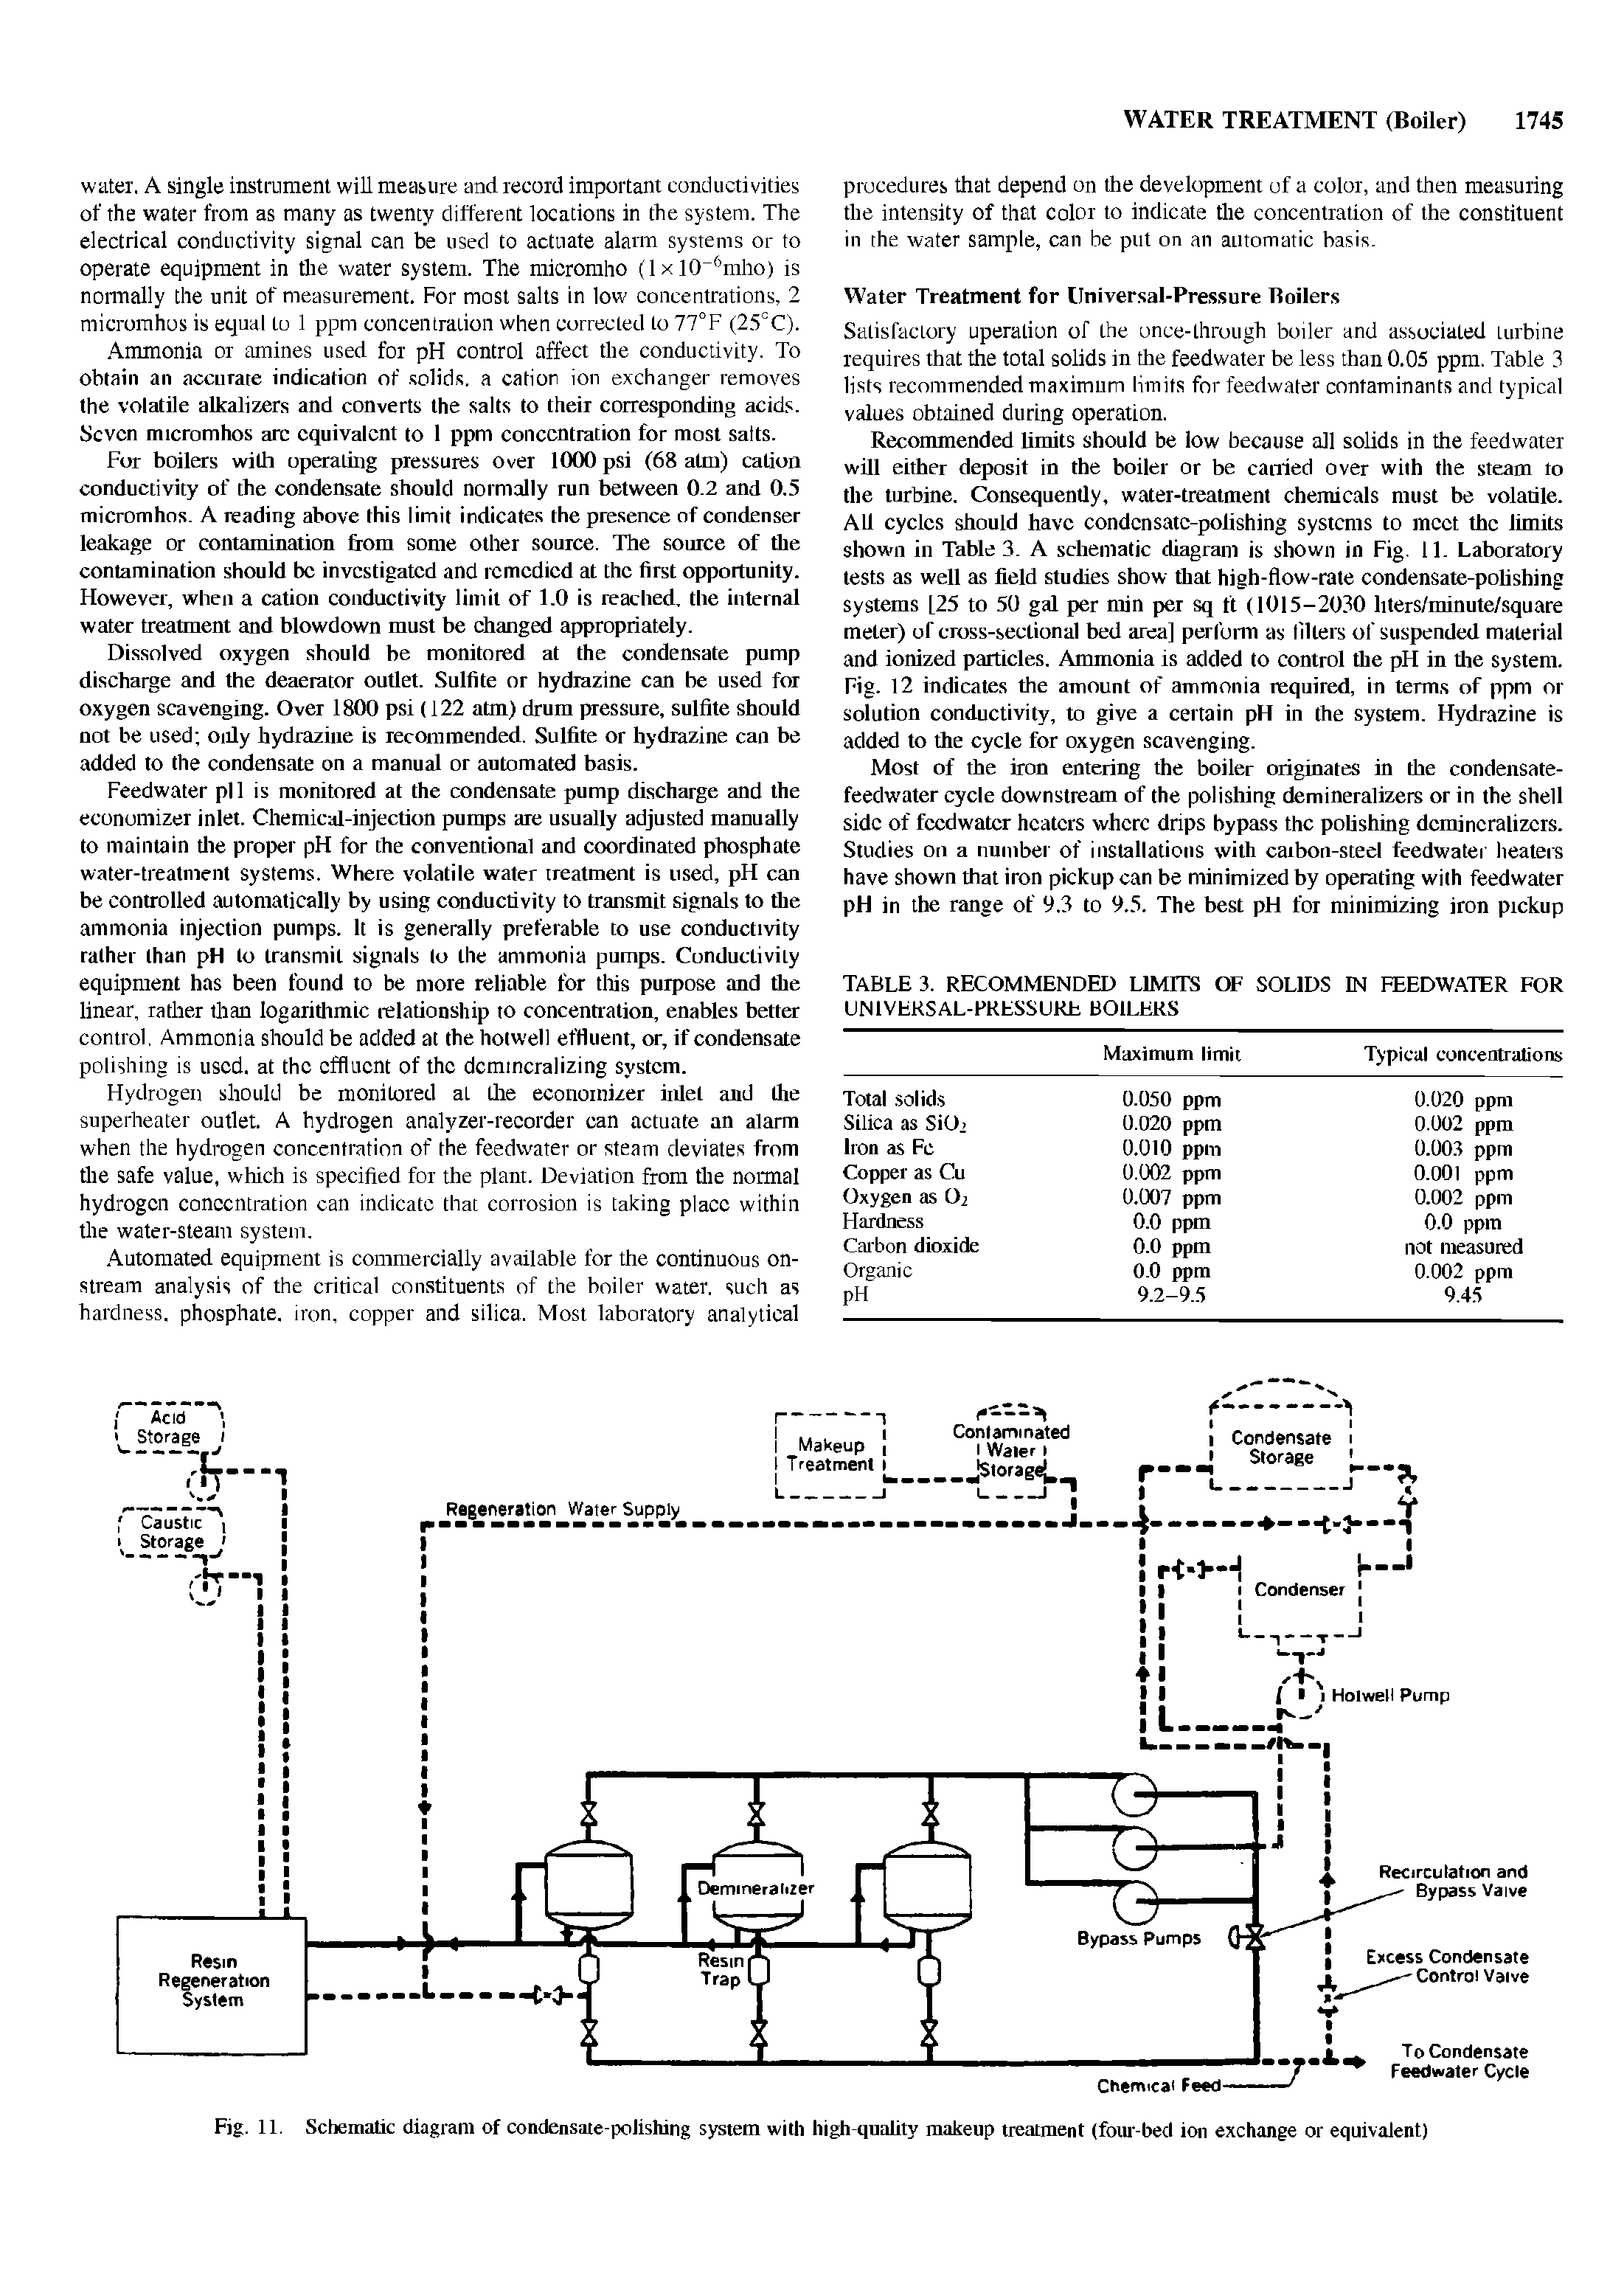 Fig. 11. Schematic diagram of condensate-polishing system with high quality makeup treatment (four-bed ion exchange or equivalent)...